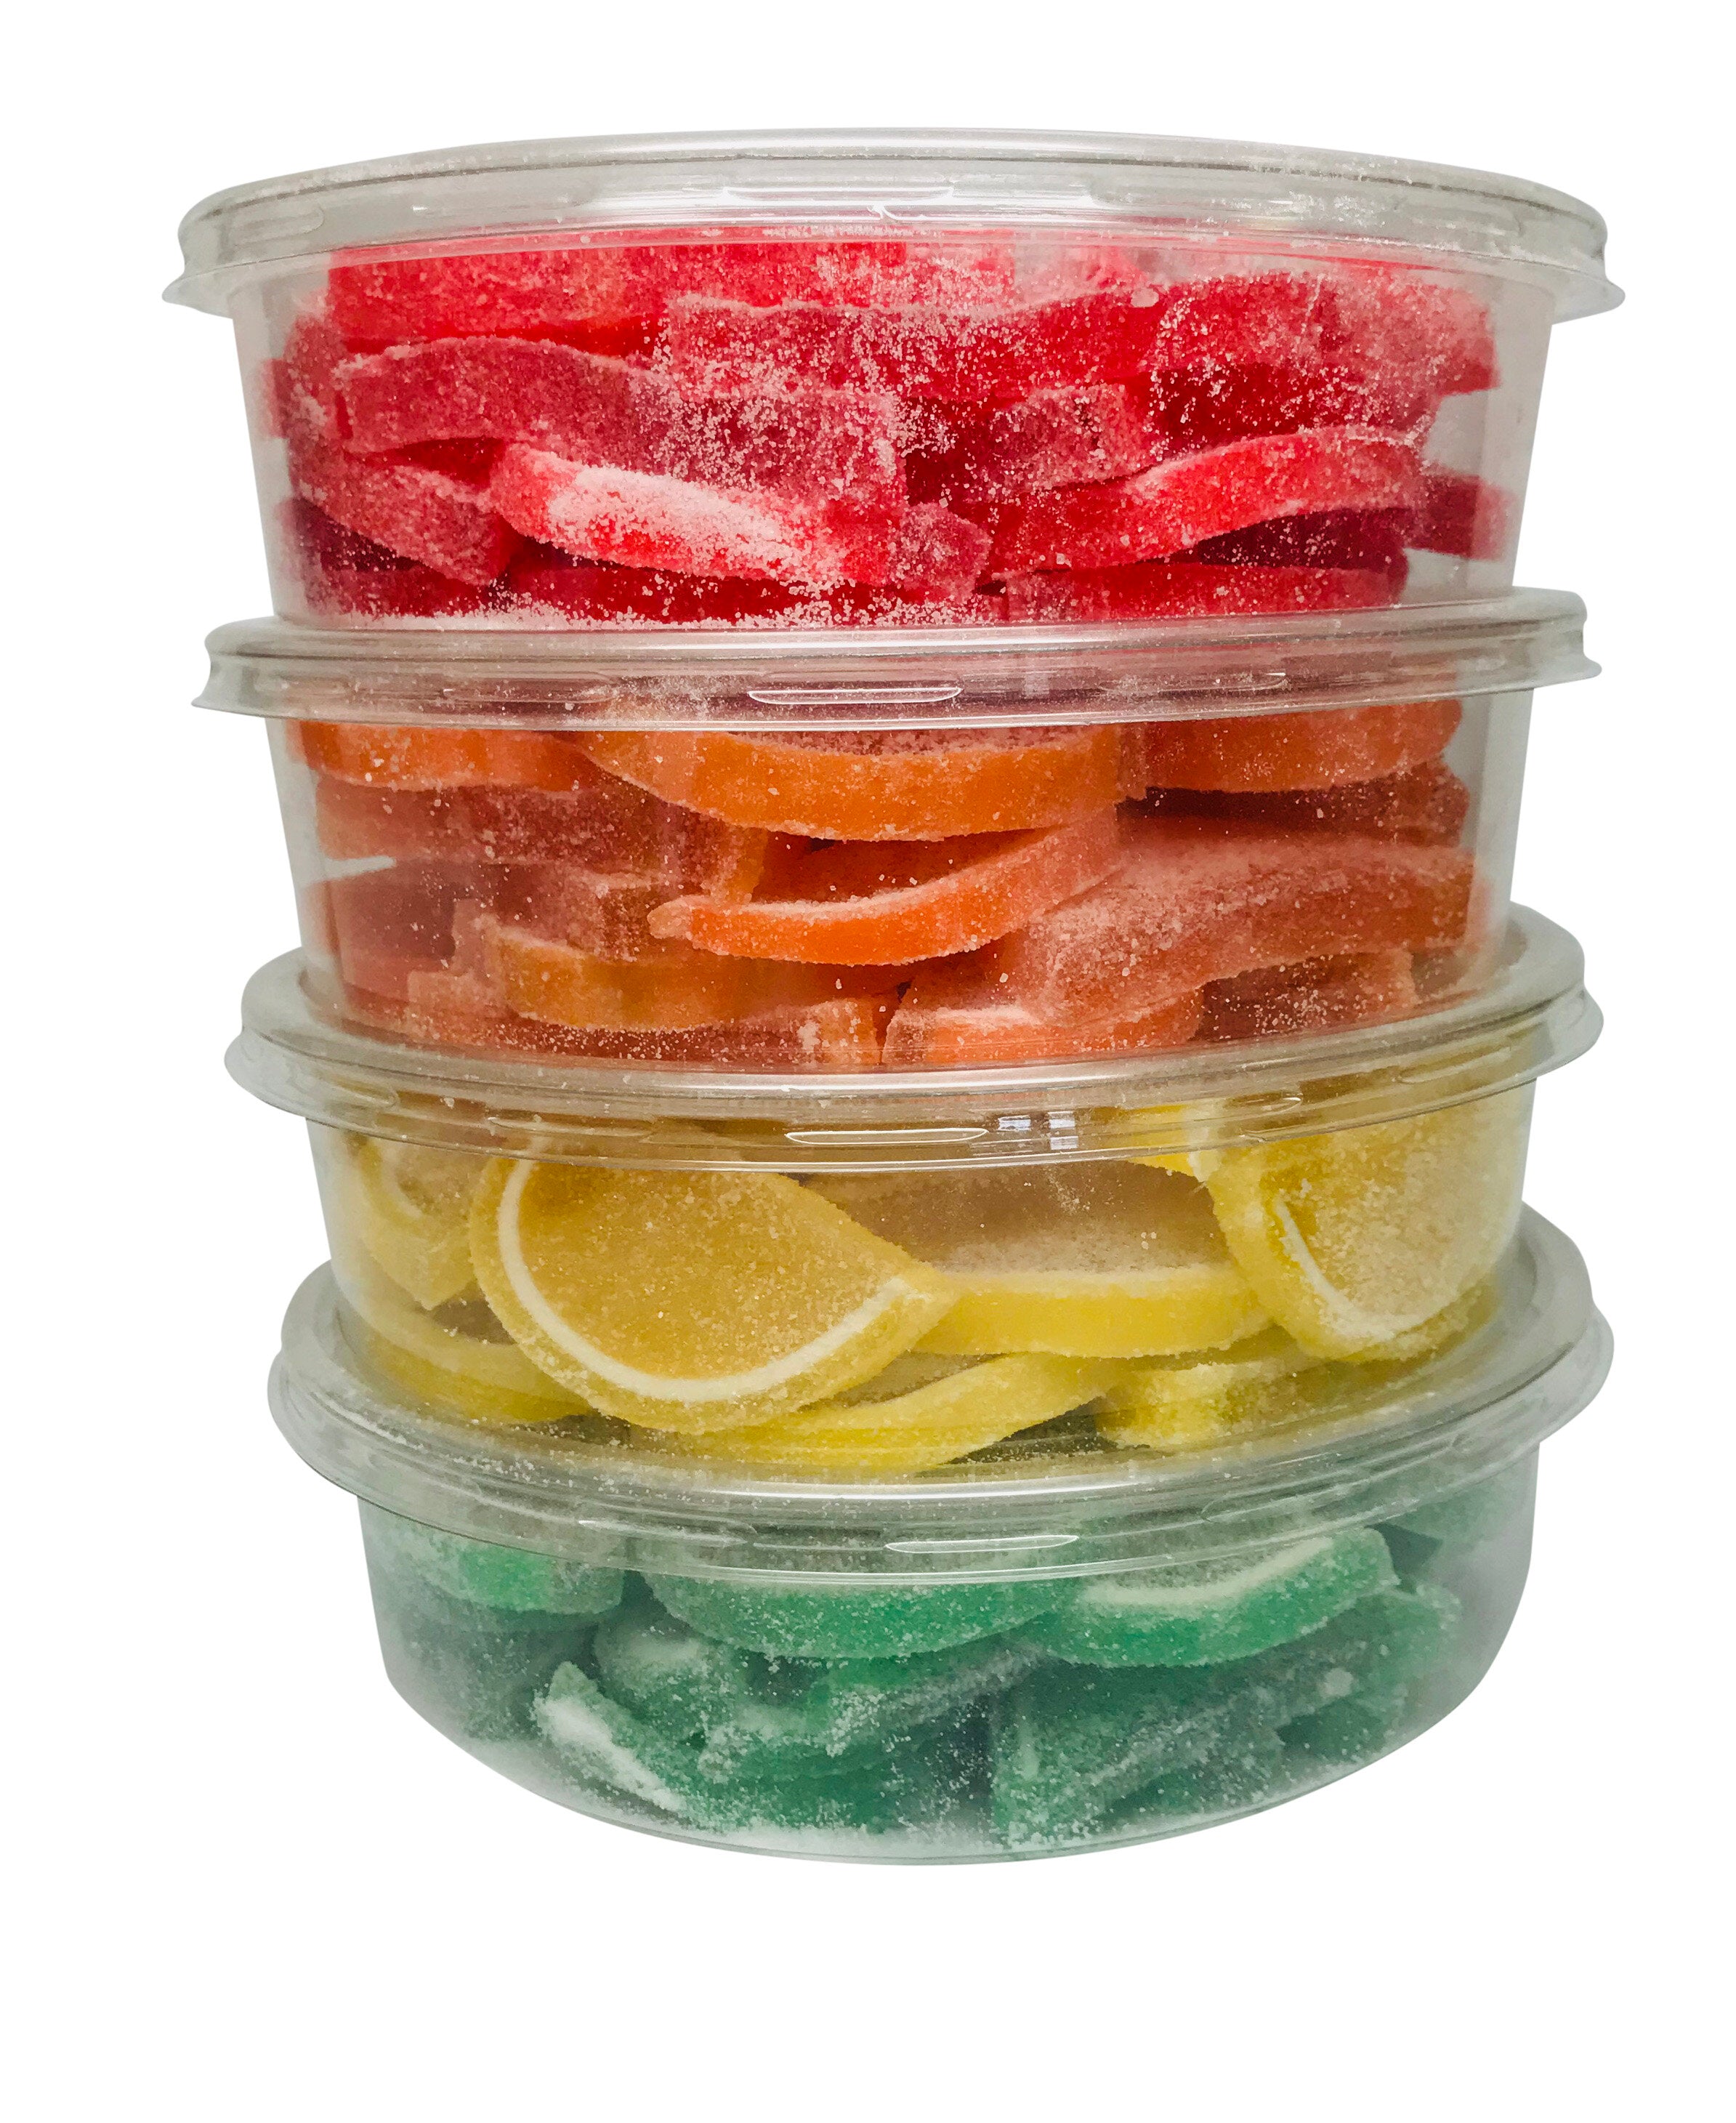 Brachs Sugar Free Fruit Slices Jelly Candy, 3 Oz (Pack of 12)